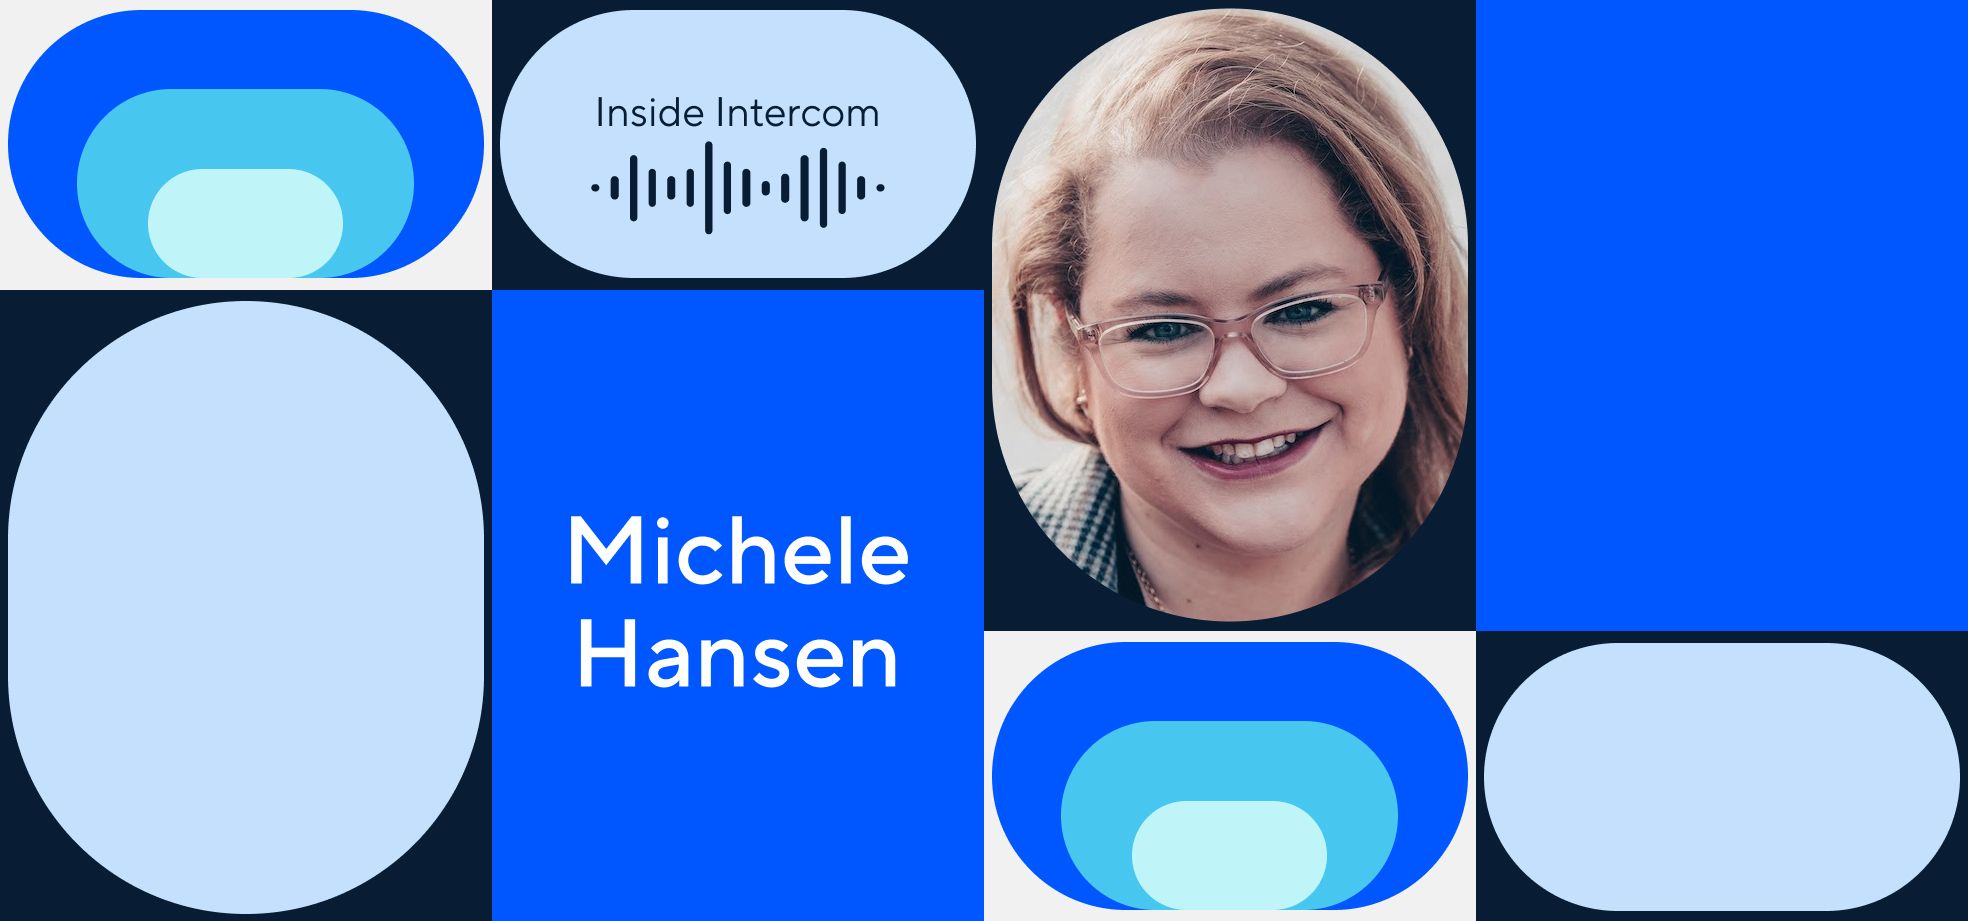 How to deploy empathy to get the most out of customer interviews, according to Geocodio’s Michele Hansen